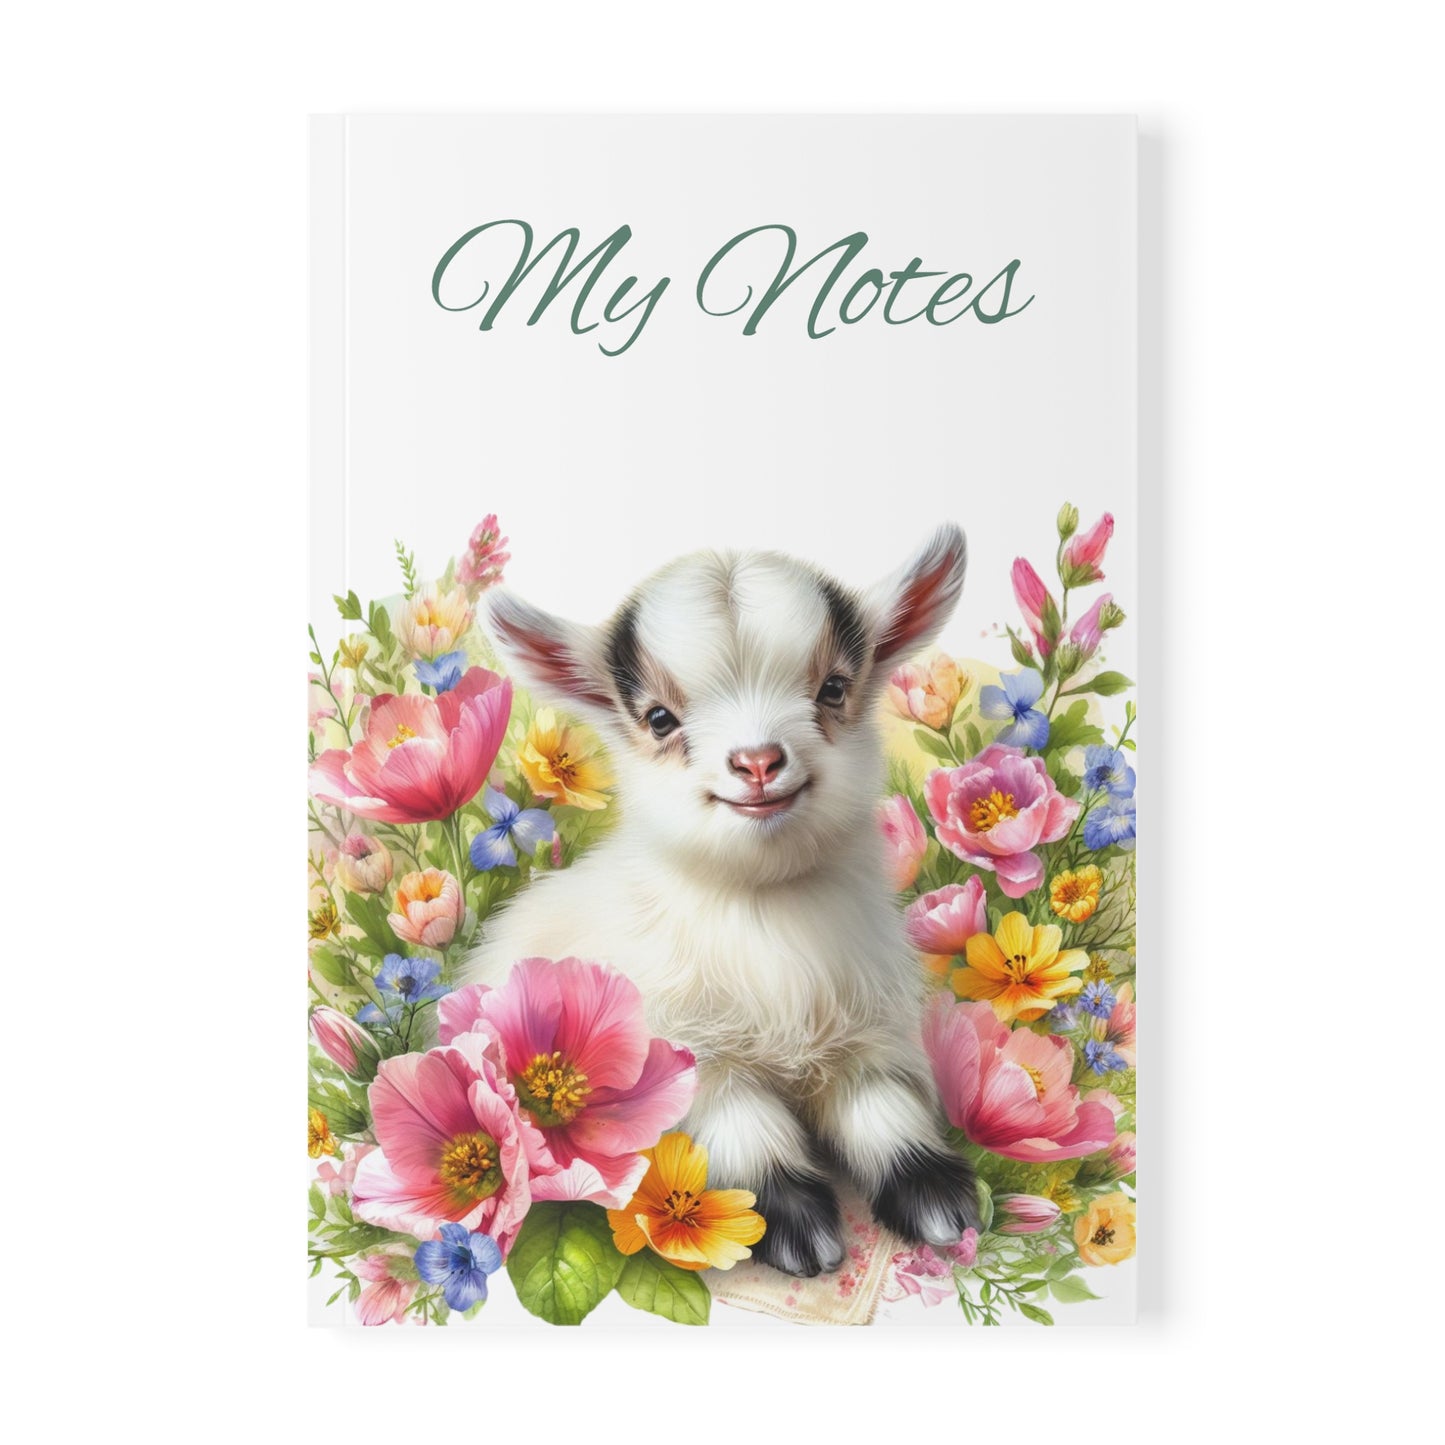 Goat Kid Softback Notebook | Stationery by Hope Valley Home